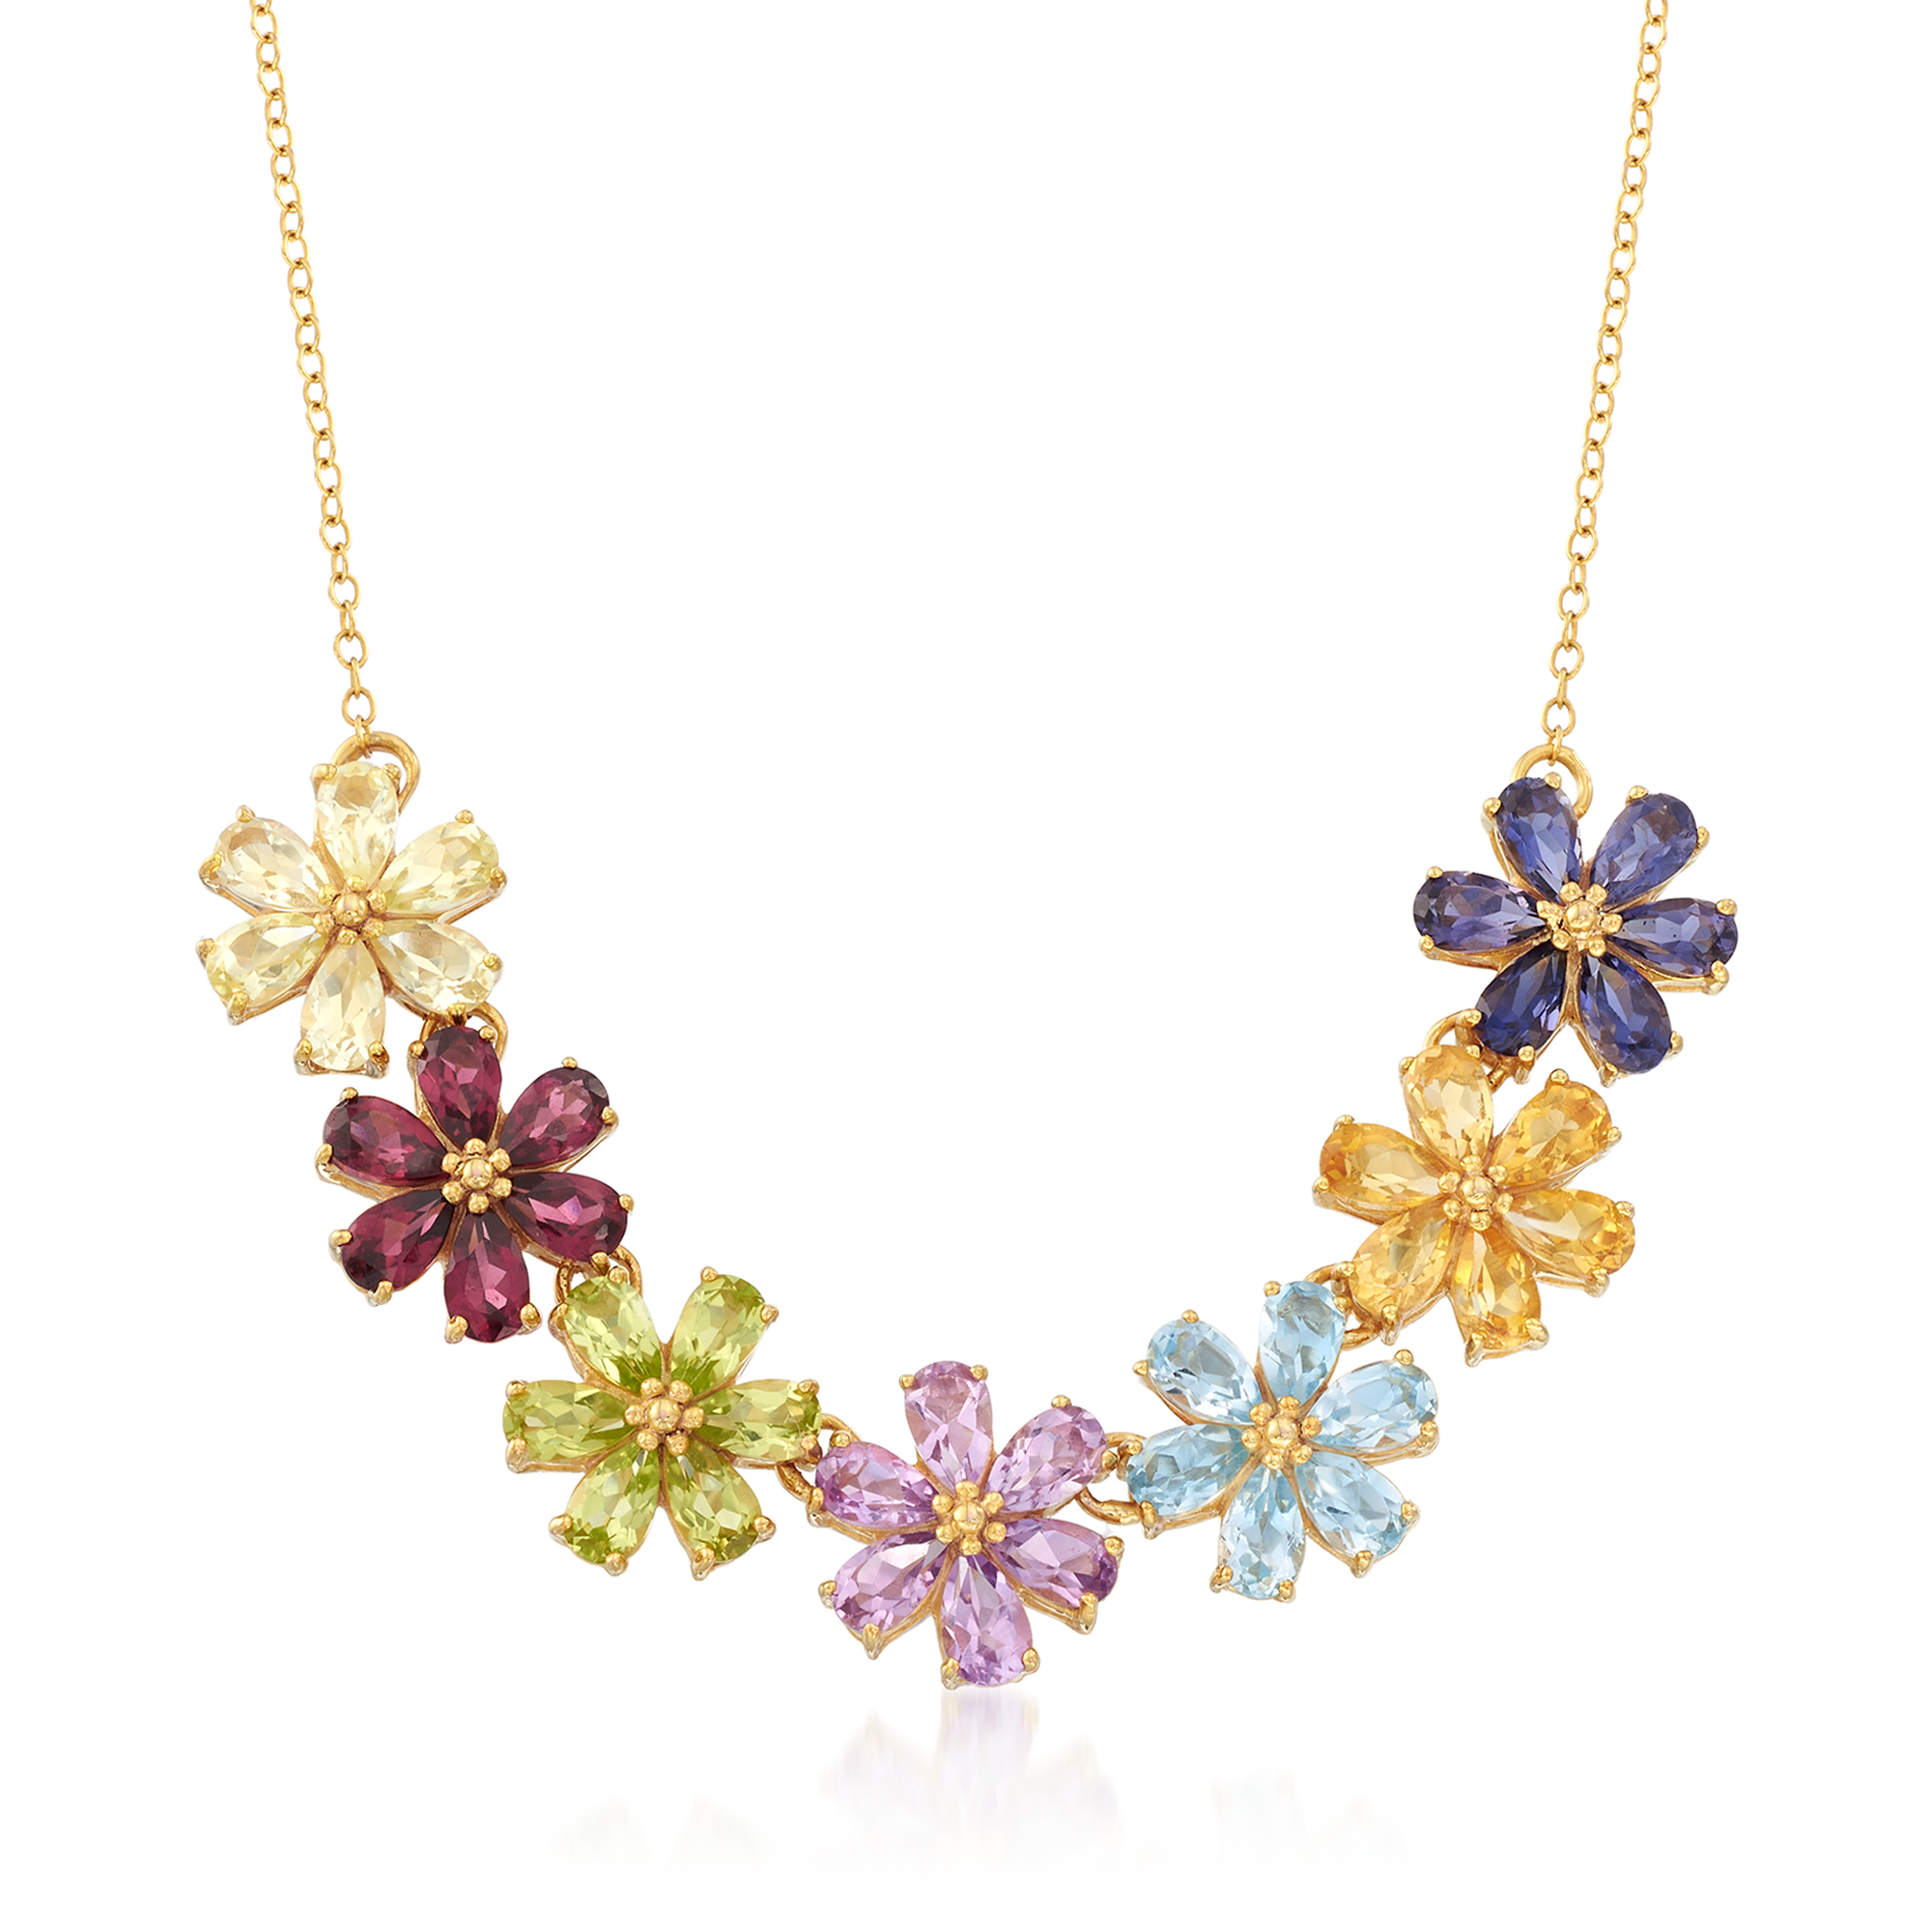 6.90 ct. t.w. Multi-Stone Flower Necklace in 18kt Gold Over 